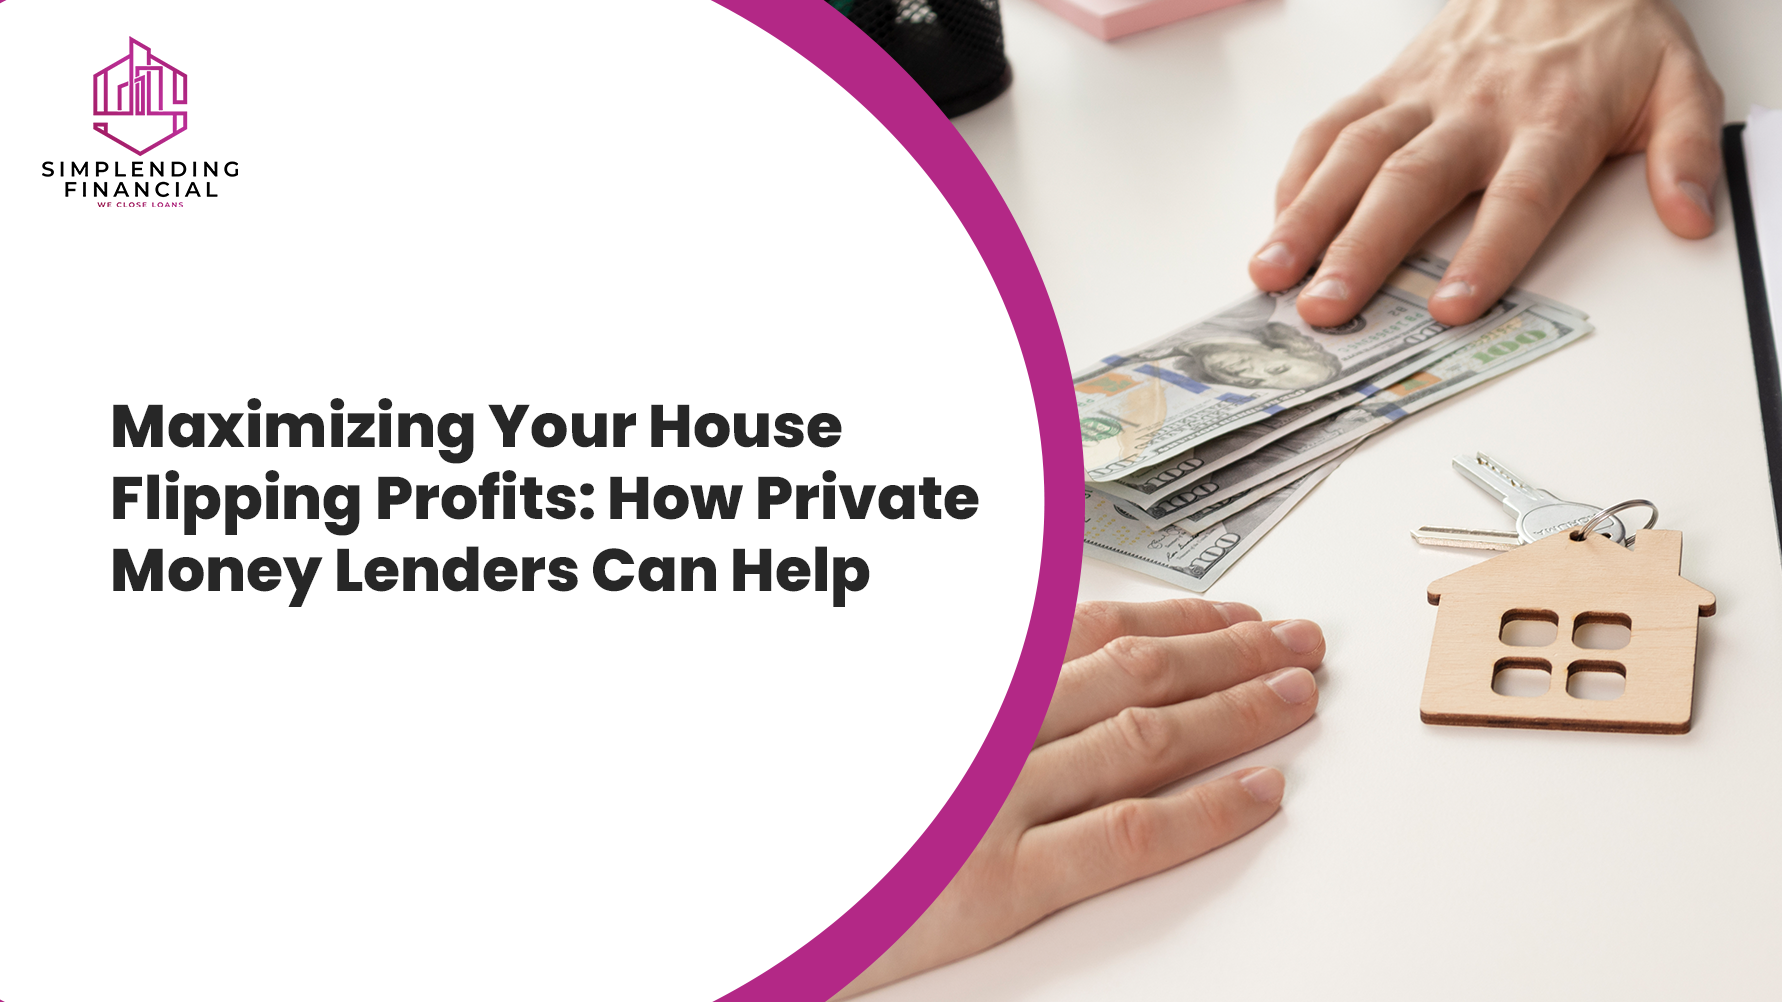 Maximizing Your House Flipping Profits: How Private Money Lenders Can Help